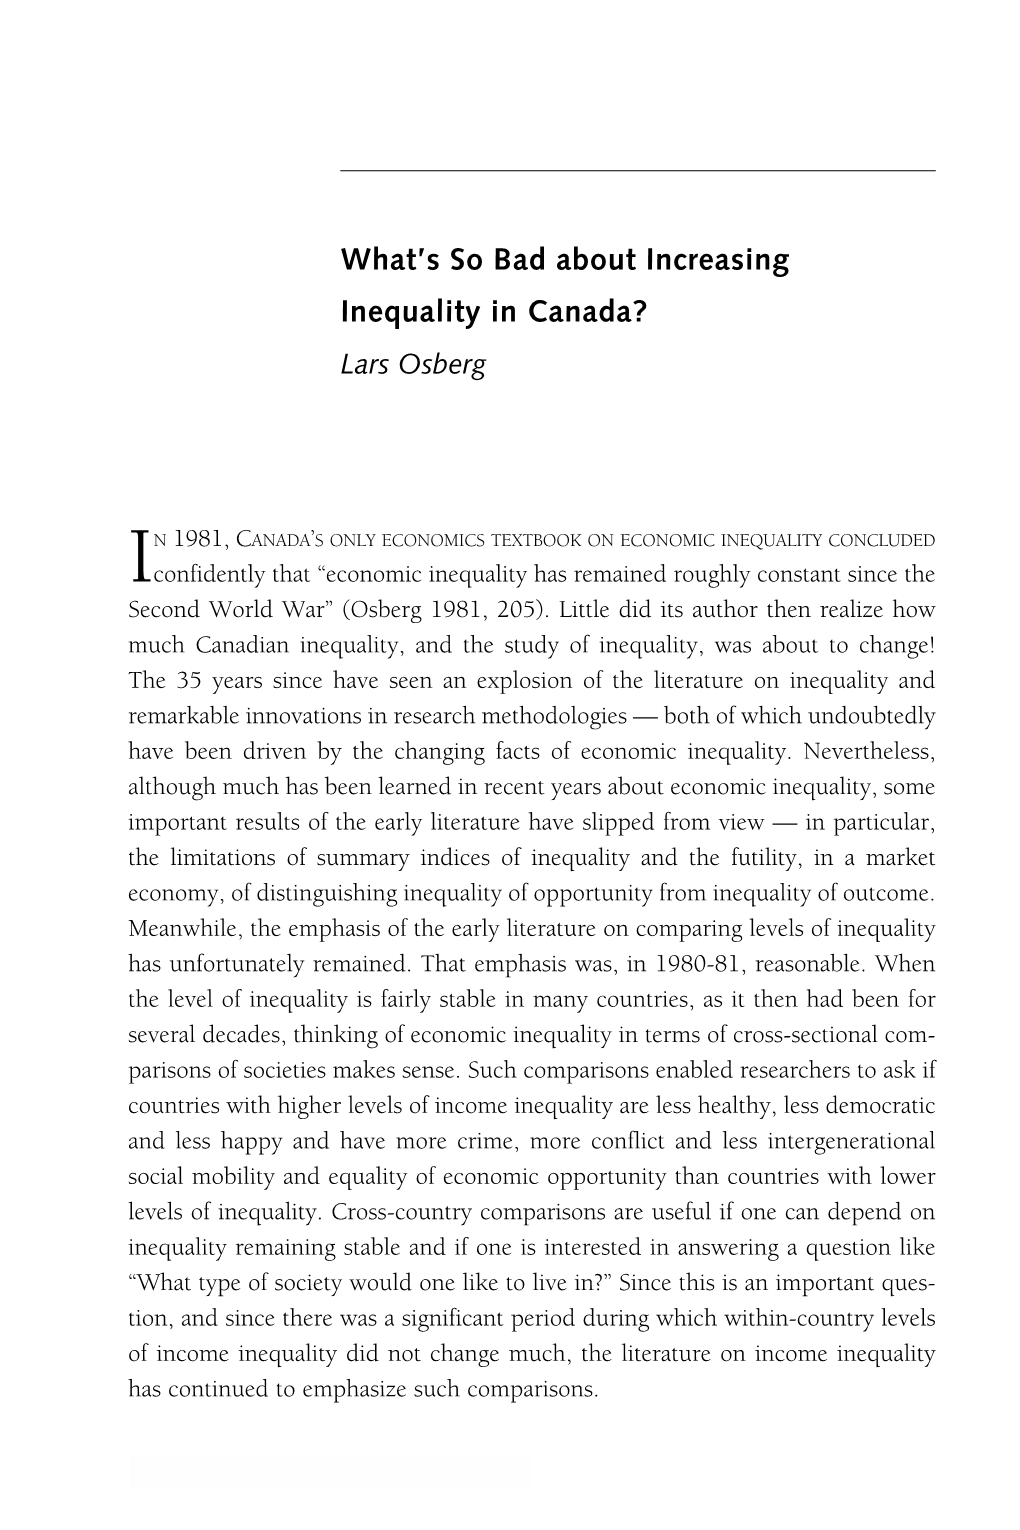 What's So Bad About Increasing Inequality in Canada?